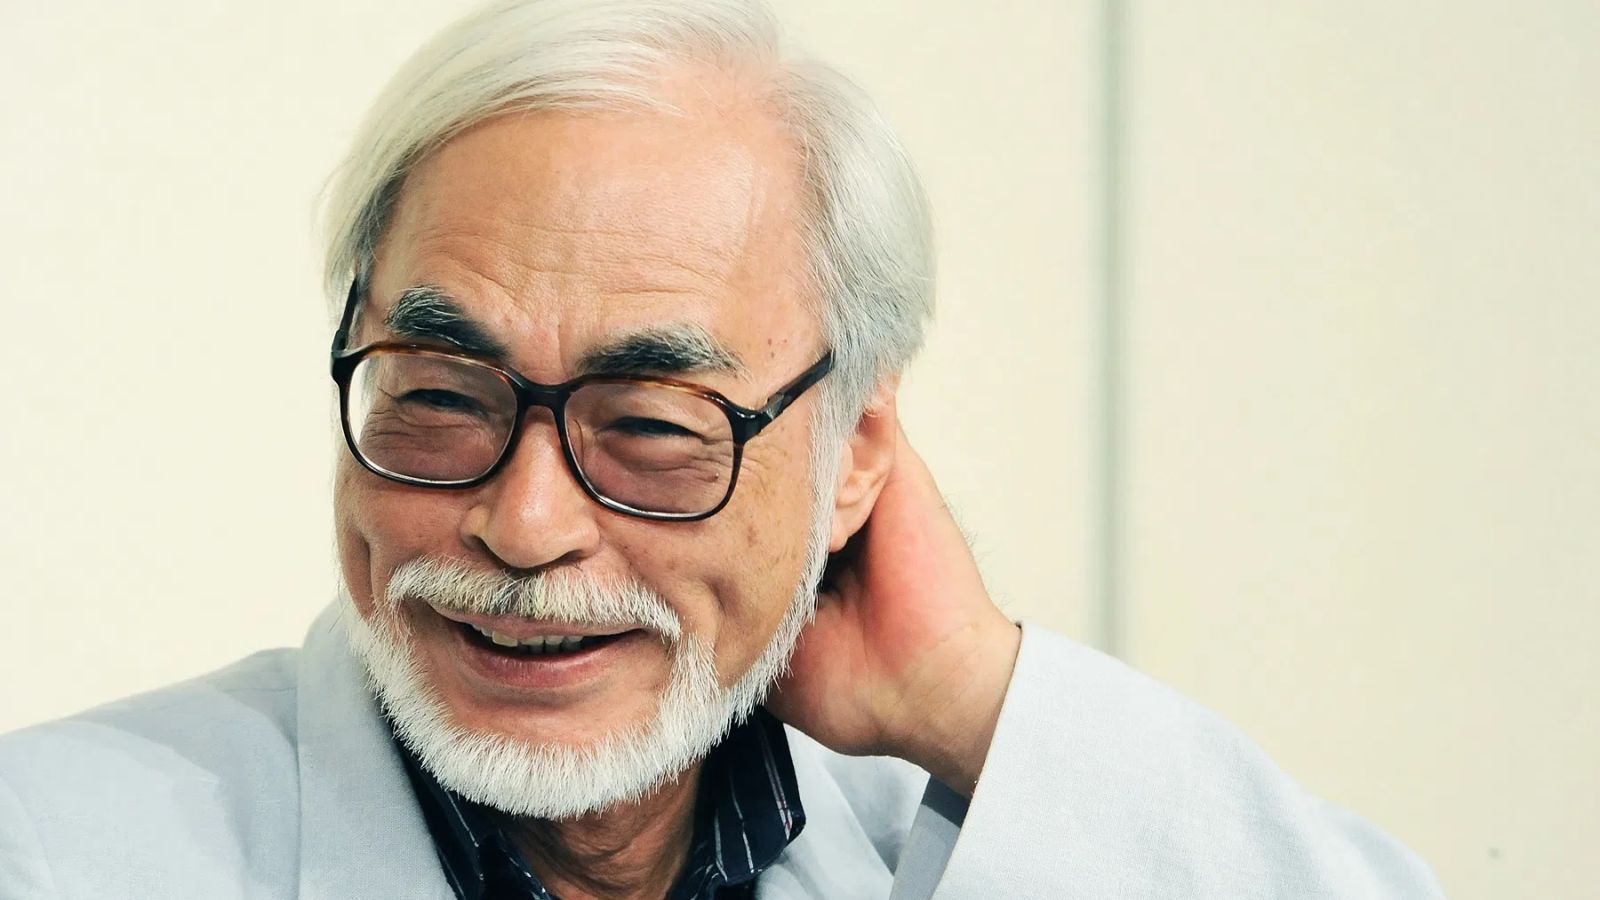 Hayao Miyazaki: maximum secrecy on the new film, which will not have a trailer or any promotion